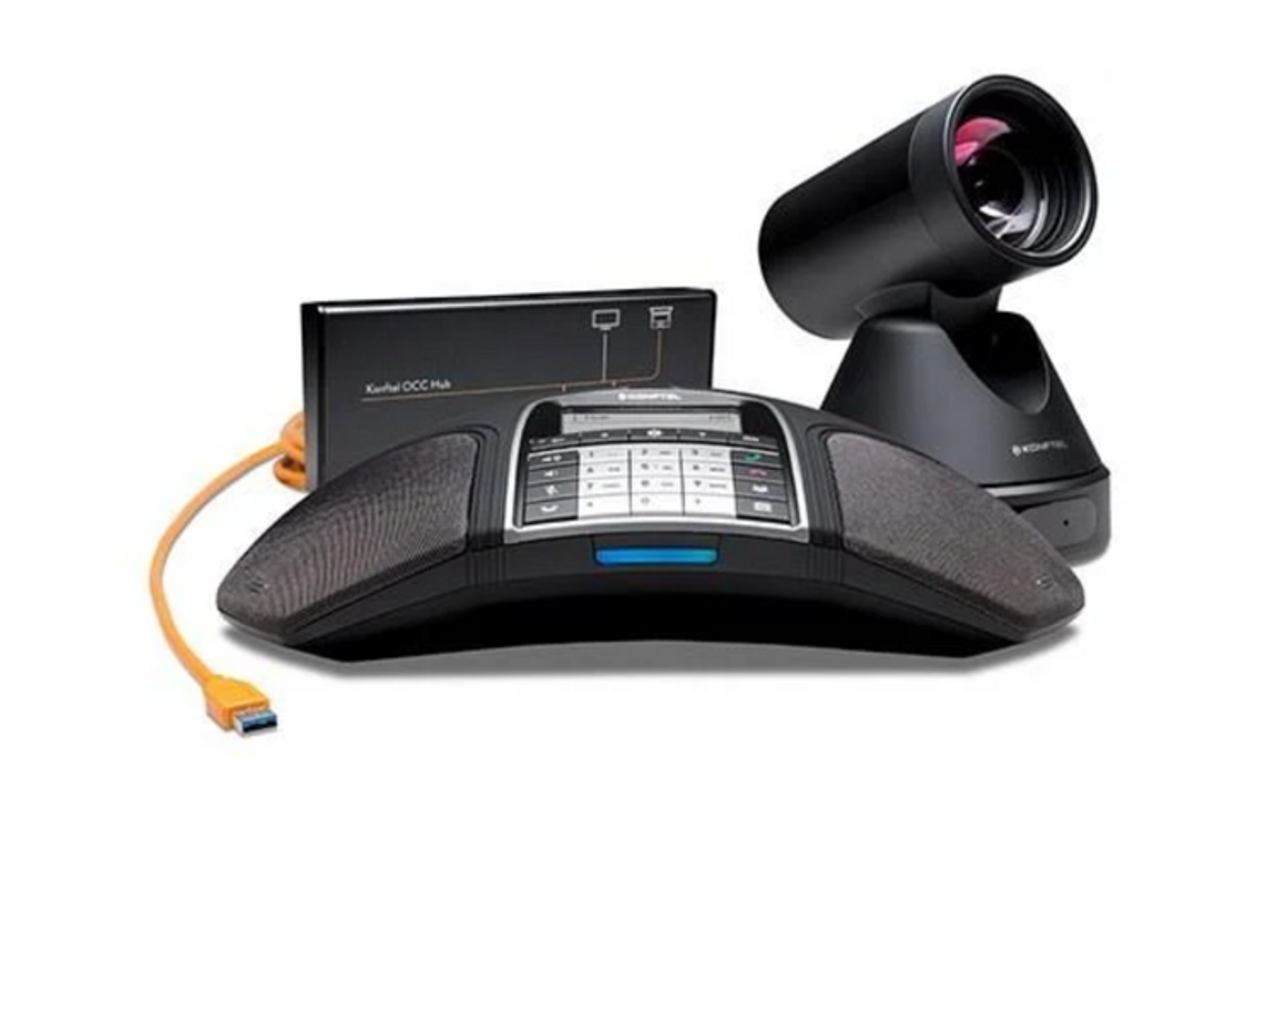 Konftel C50300Wx Video Conferencing Kit featuring the Konftel 300Wx Speakerphone and Konftel CAM 50 Video Conferencing PTZ Camera